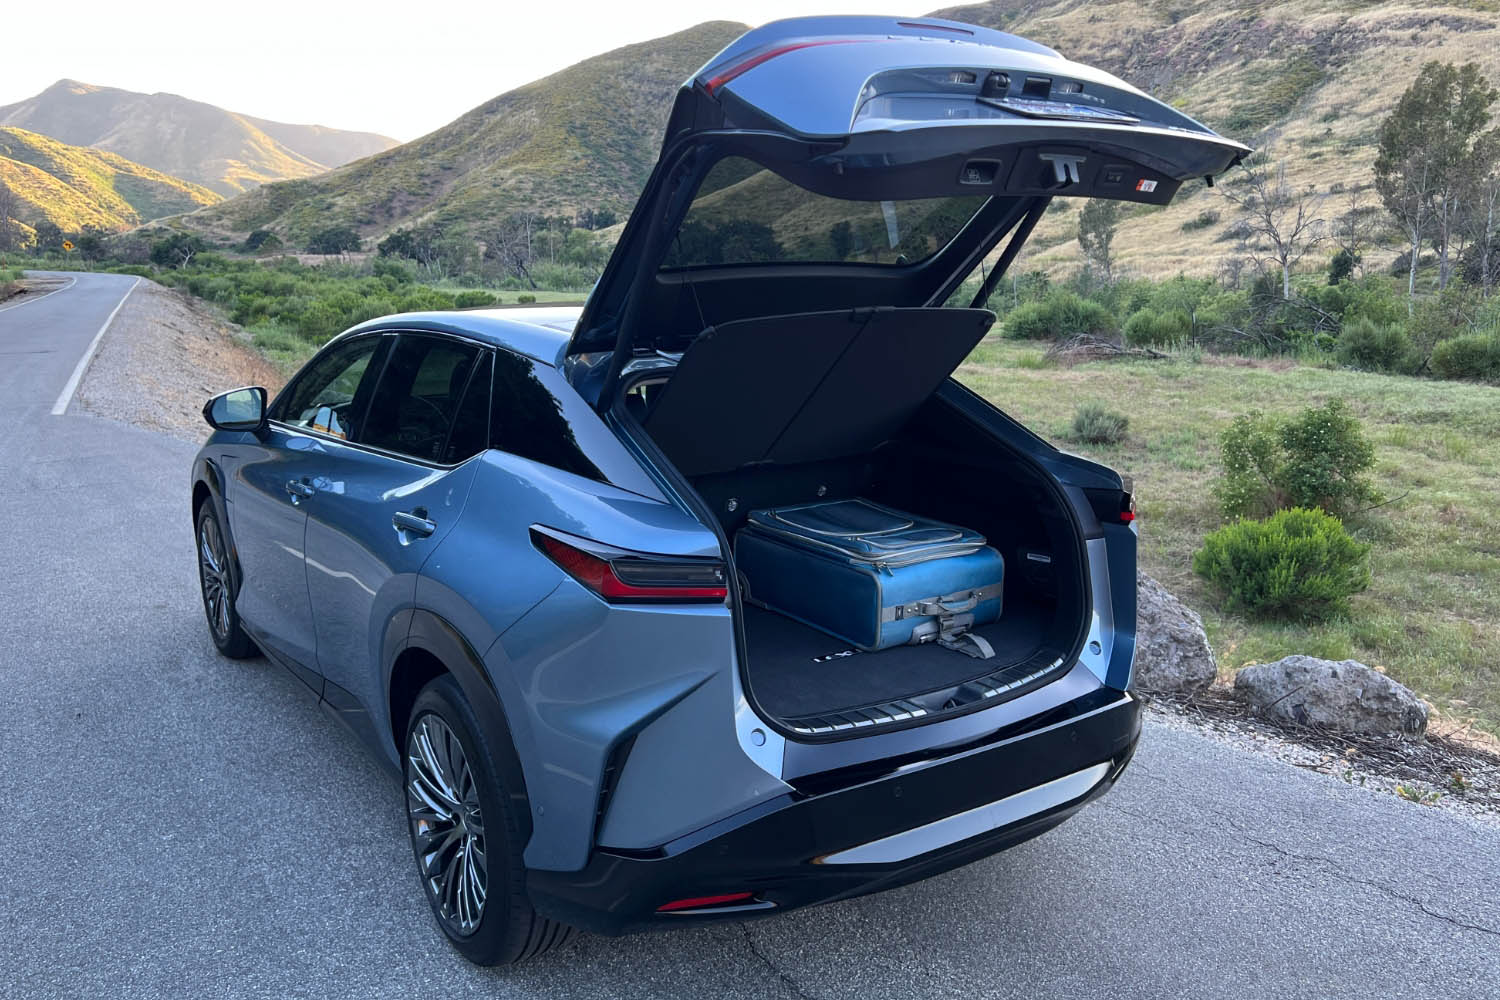 The cargo area of a blue 2023 Lexus RZ holding a suitcase